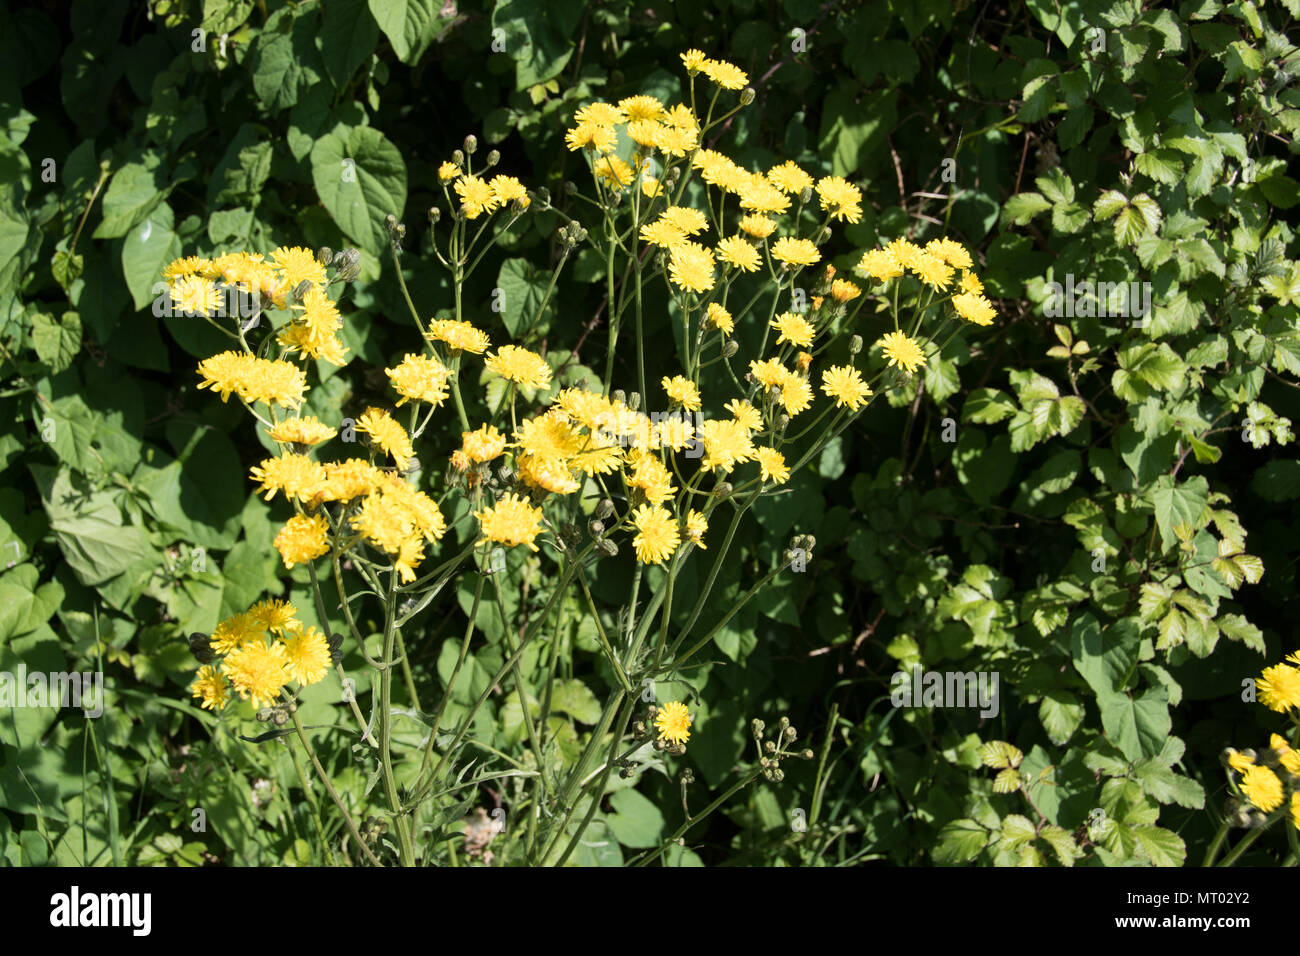 The golden-yellow flowers of Crepis biennis, hawks-beard, a common wildflower Stock Photo